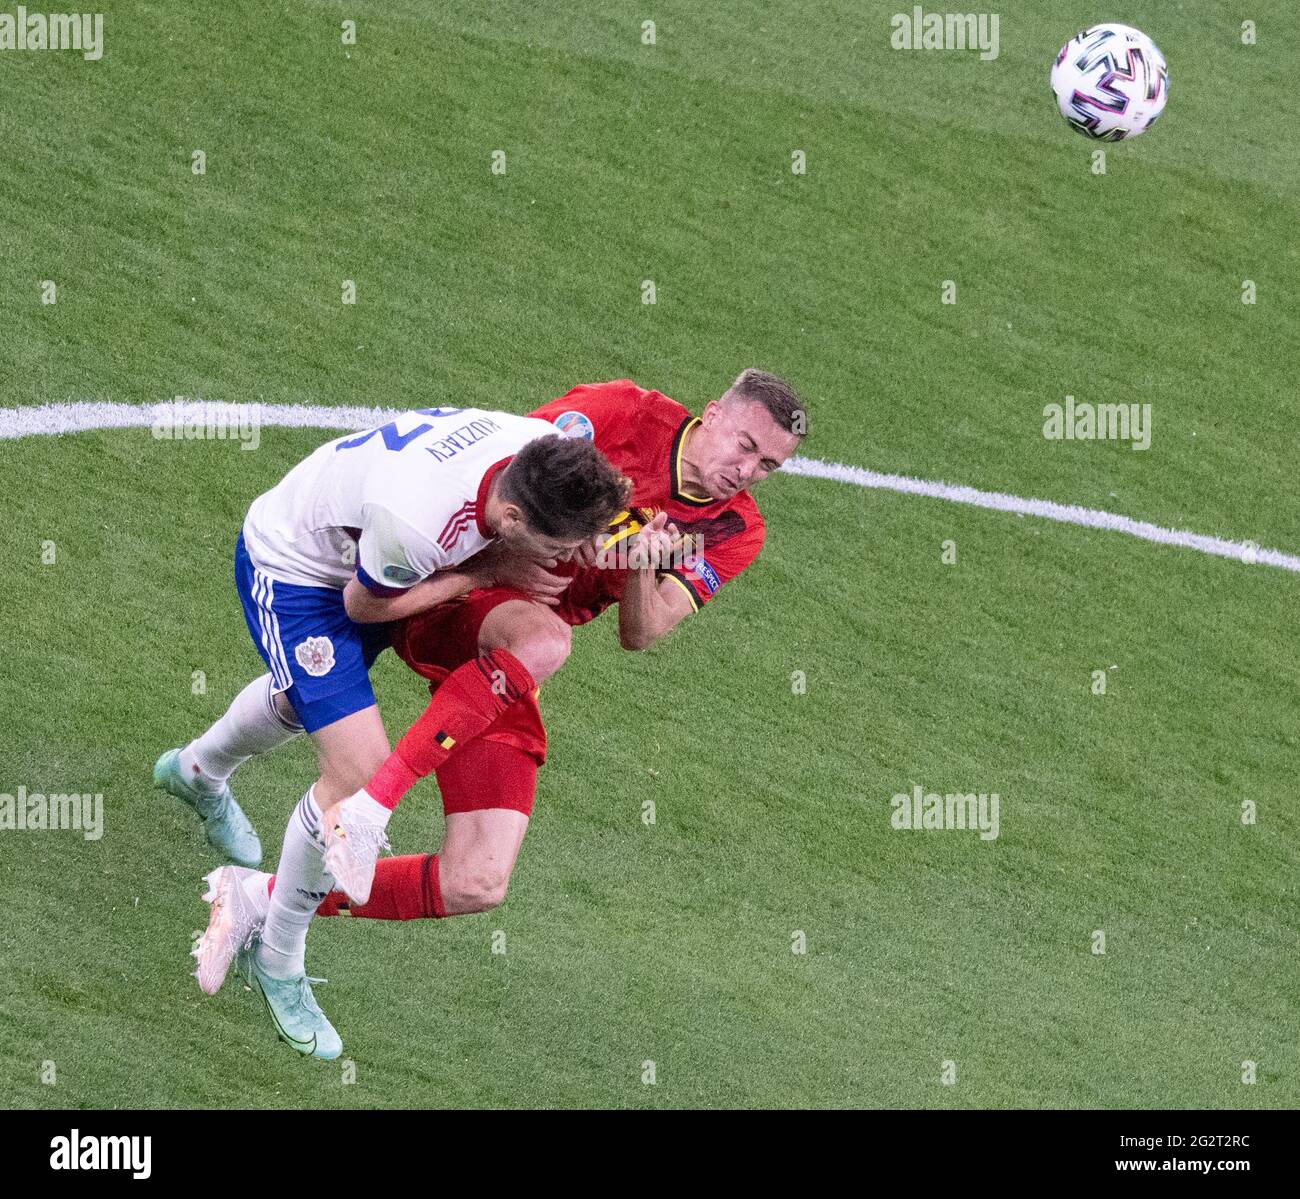 SAINT PETERSBURG, RUSSIA - JUNE 12: Timothy Castagne of Belgium collides with Daler Kuzyayev of Russia during the UEFA Euro 2020 Championship Group B match between Belgium and Russia on June 12, 2021 in Saint Petersburg, Russia. (Photo by MB Media) Stock Photo